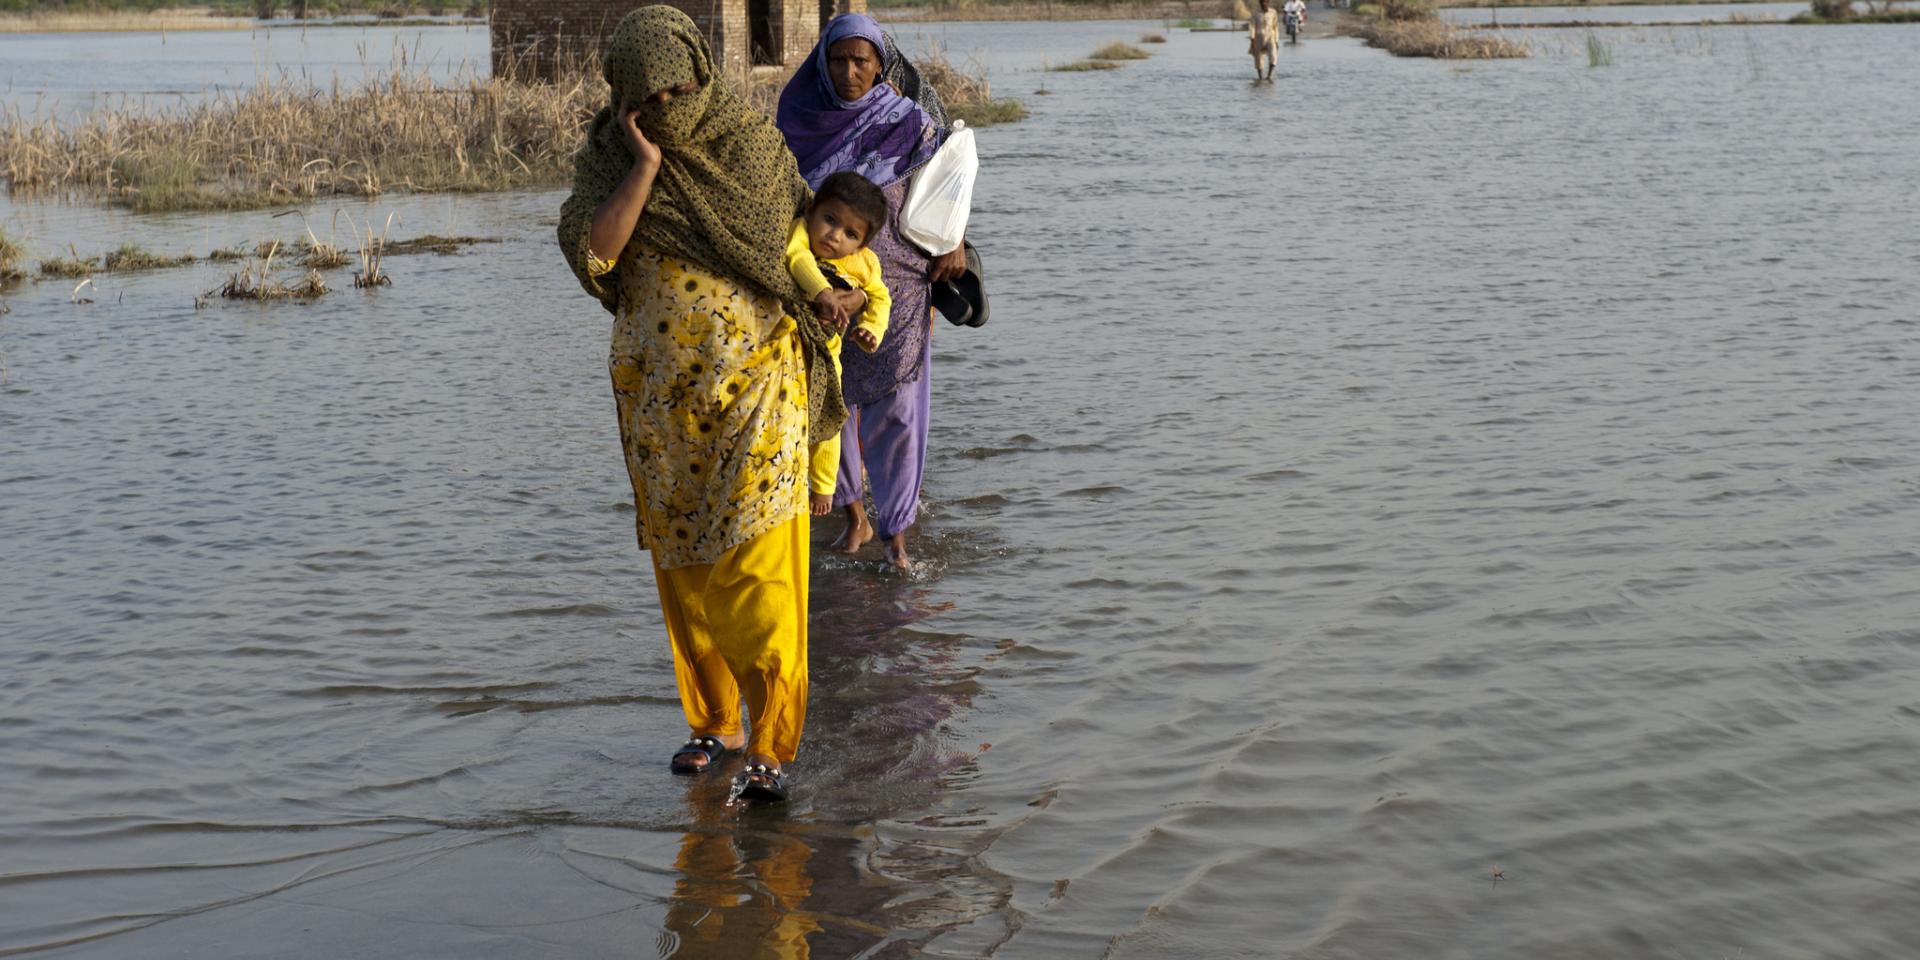 A family crosses the flooded streets of Pakistan.